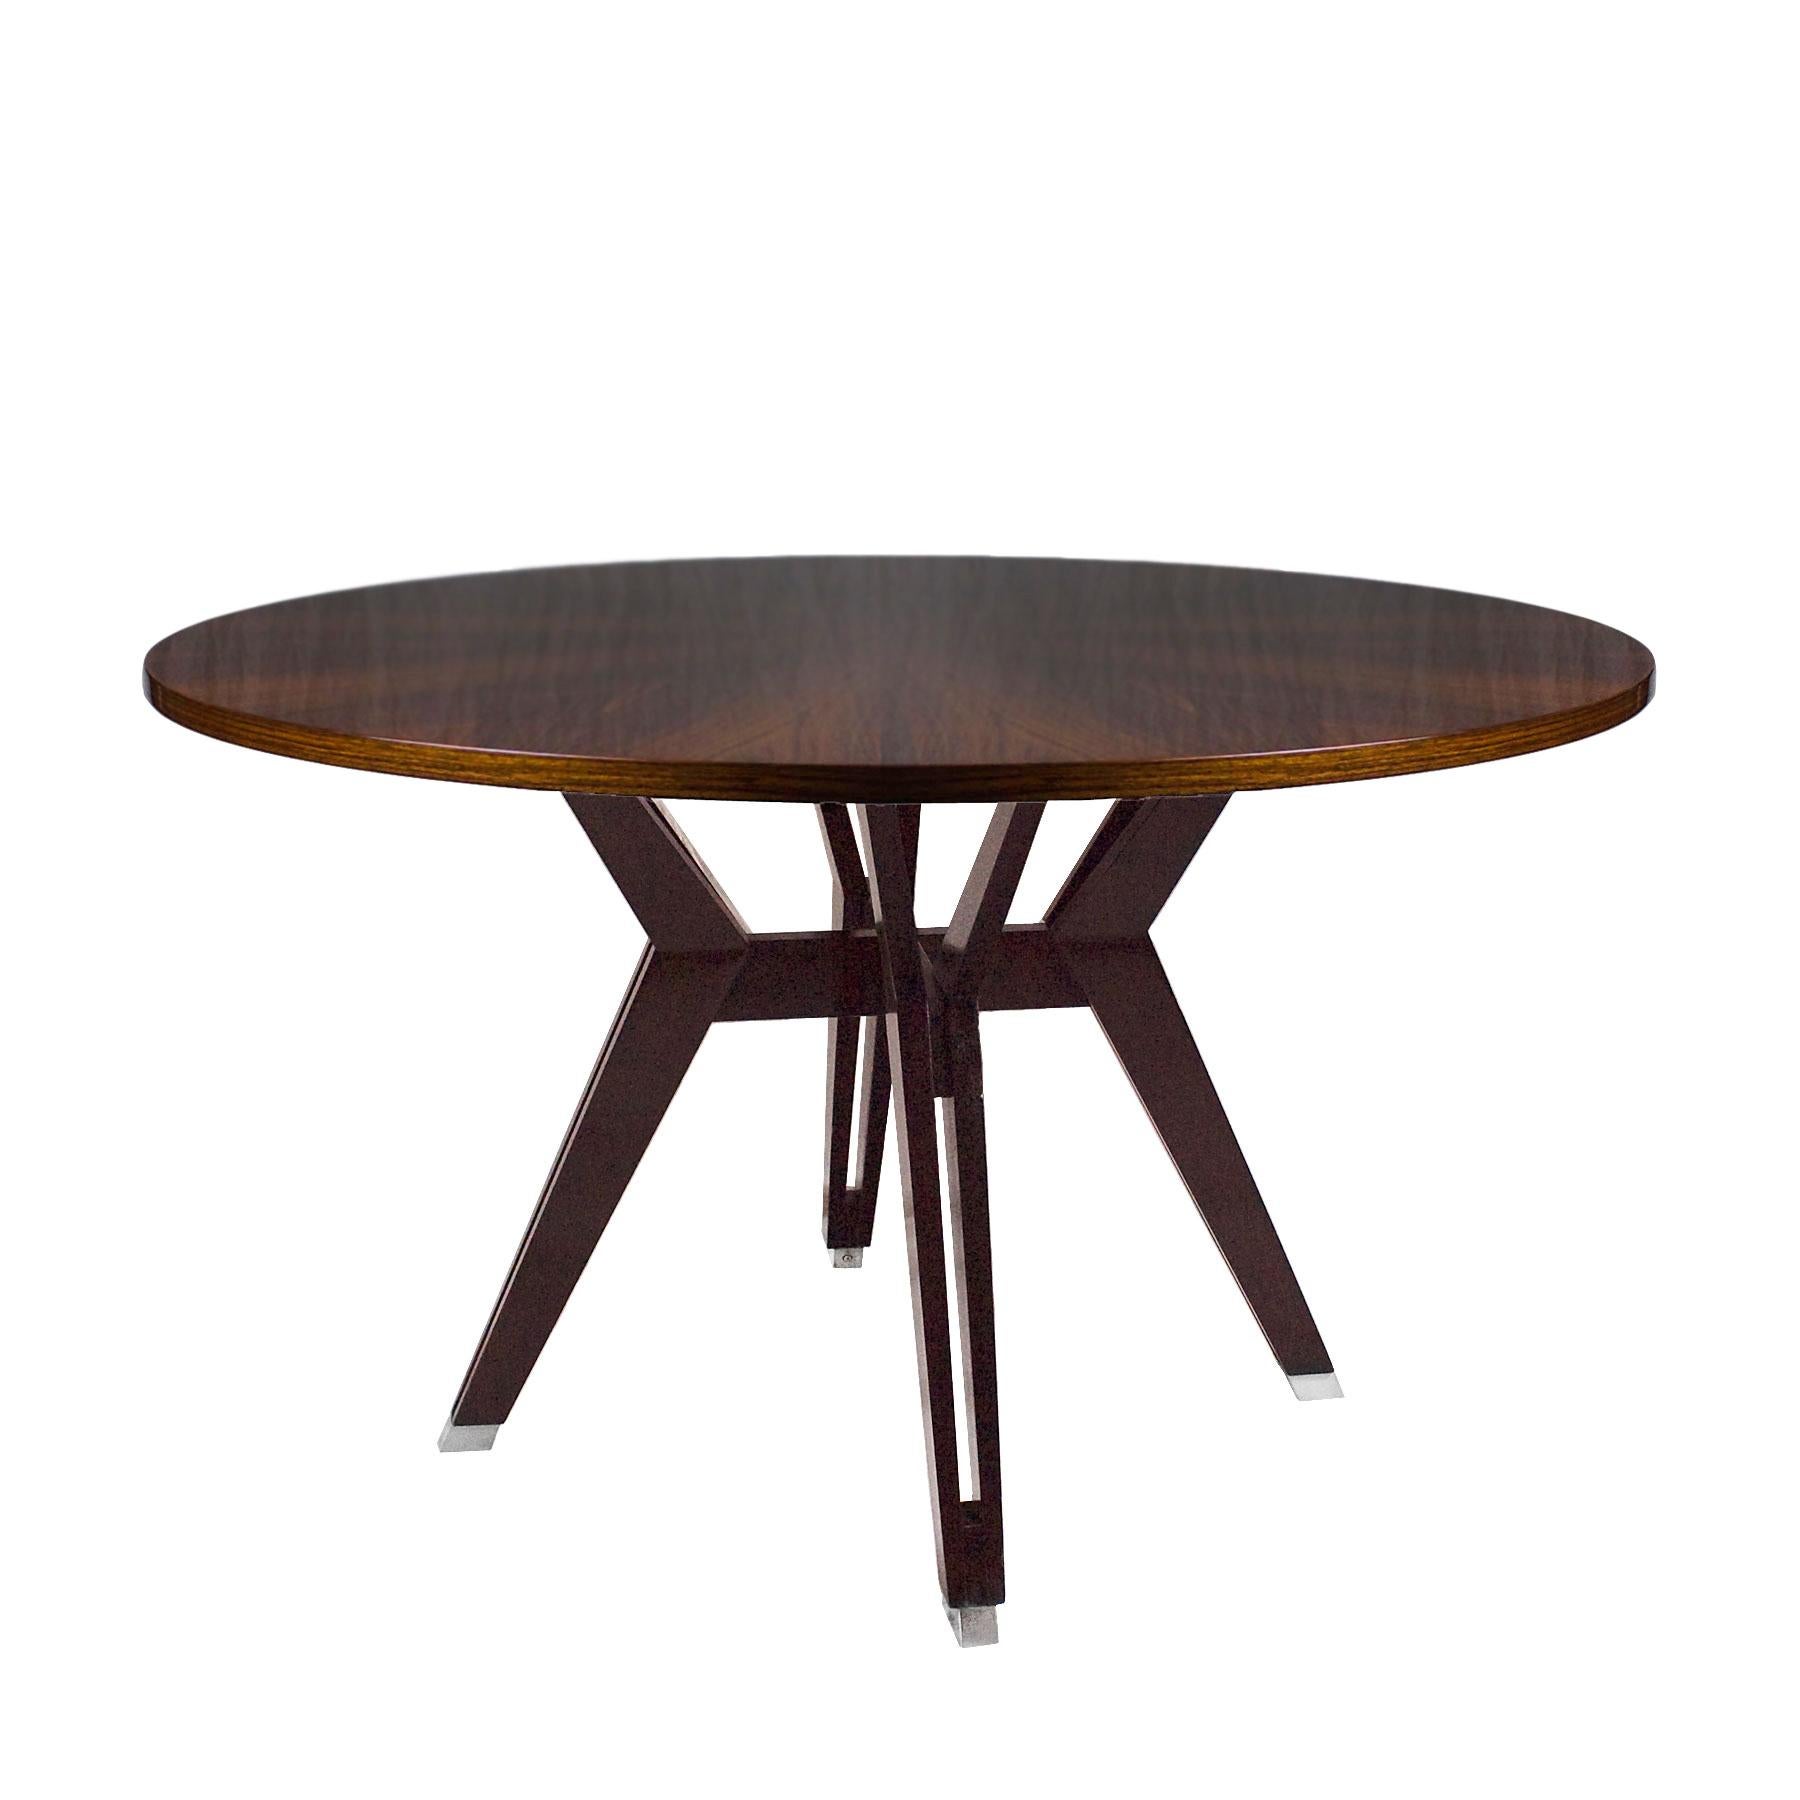 Round table with solid walnut openwork four doble stands connected by a strut, nickel plated metal hardware, top with star shape mahogany palm veneer, French polish.
Design: Ico Parisi.
Maker: M.I.M. Roma (label)

Italy 1958.